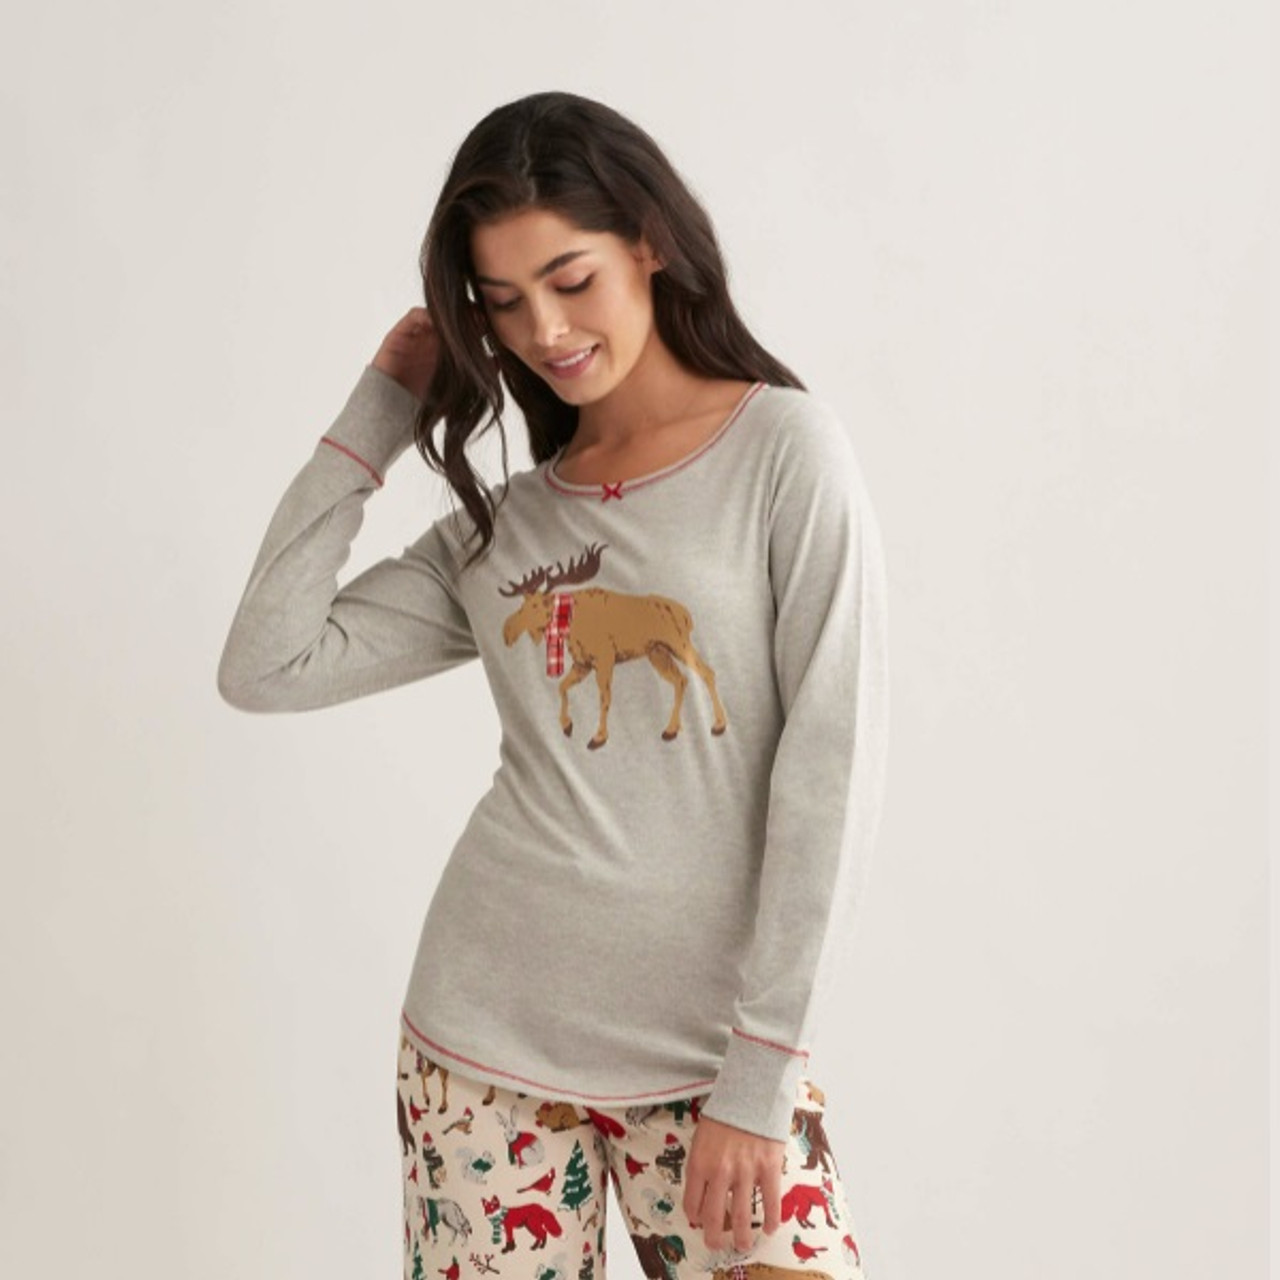 Moose on Red Women's Jersey Pajama Pants - Little Blue House US